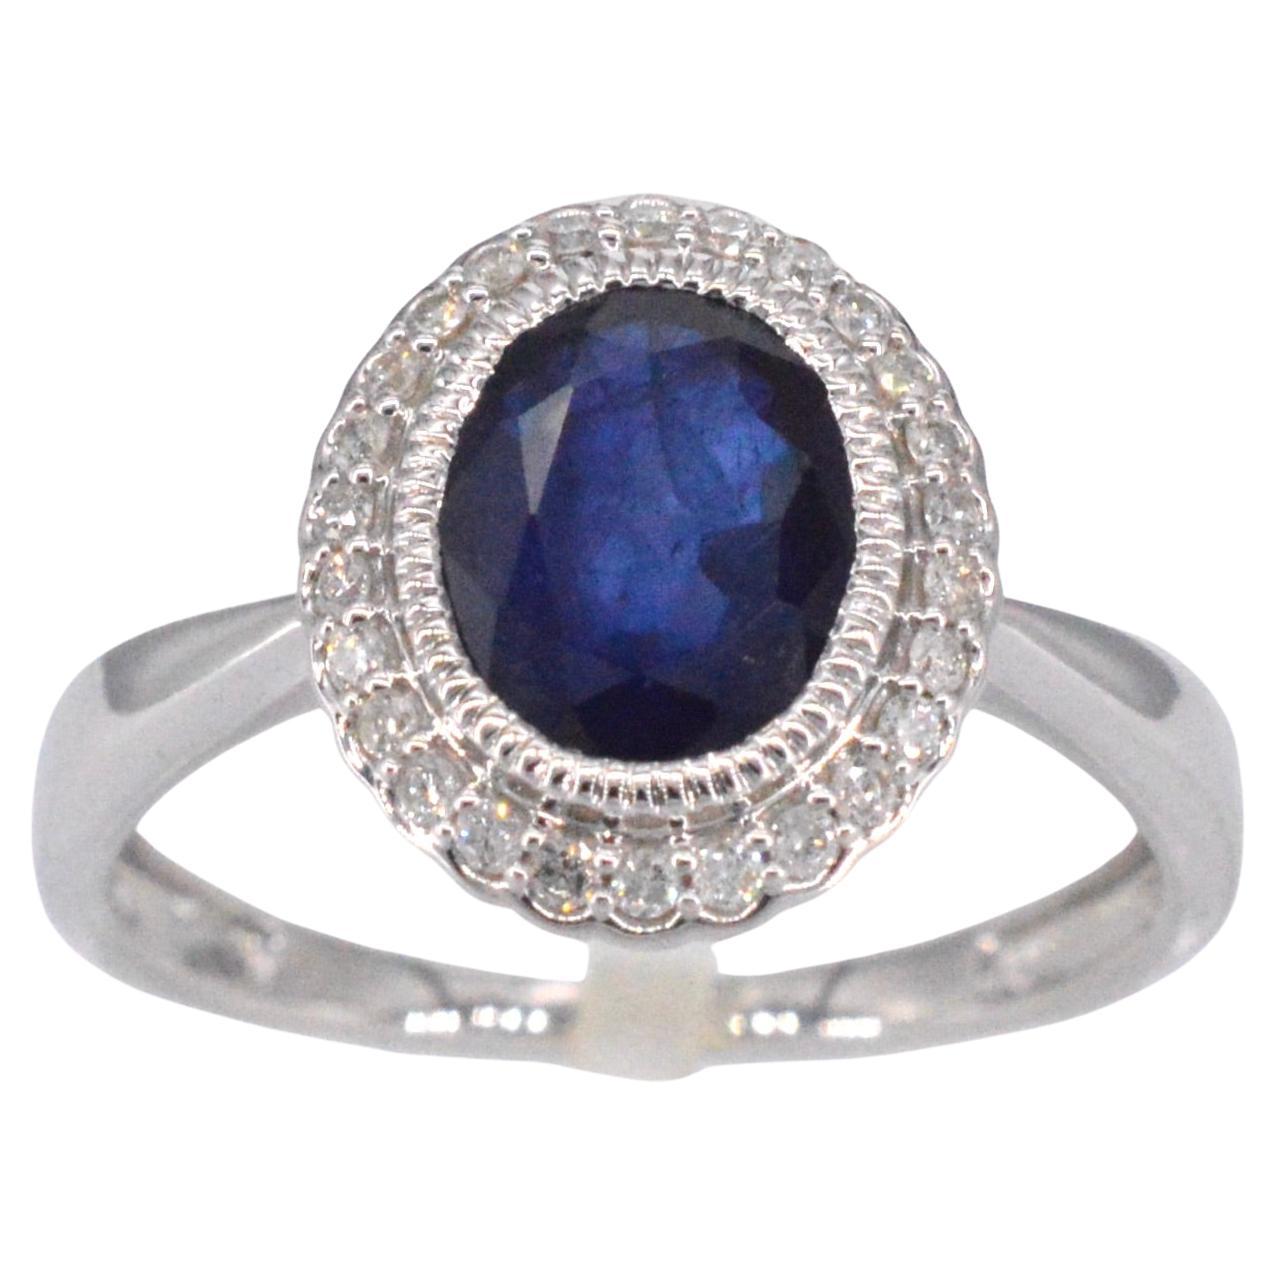 White gold entourage ring with diamonds and sapphire